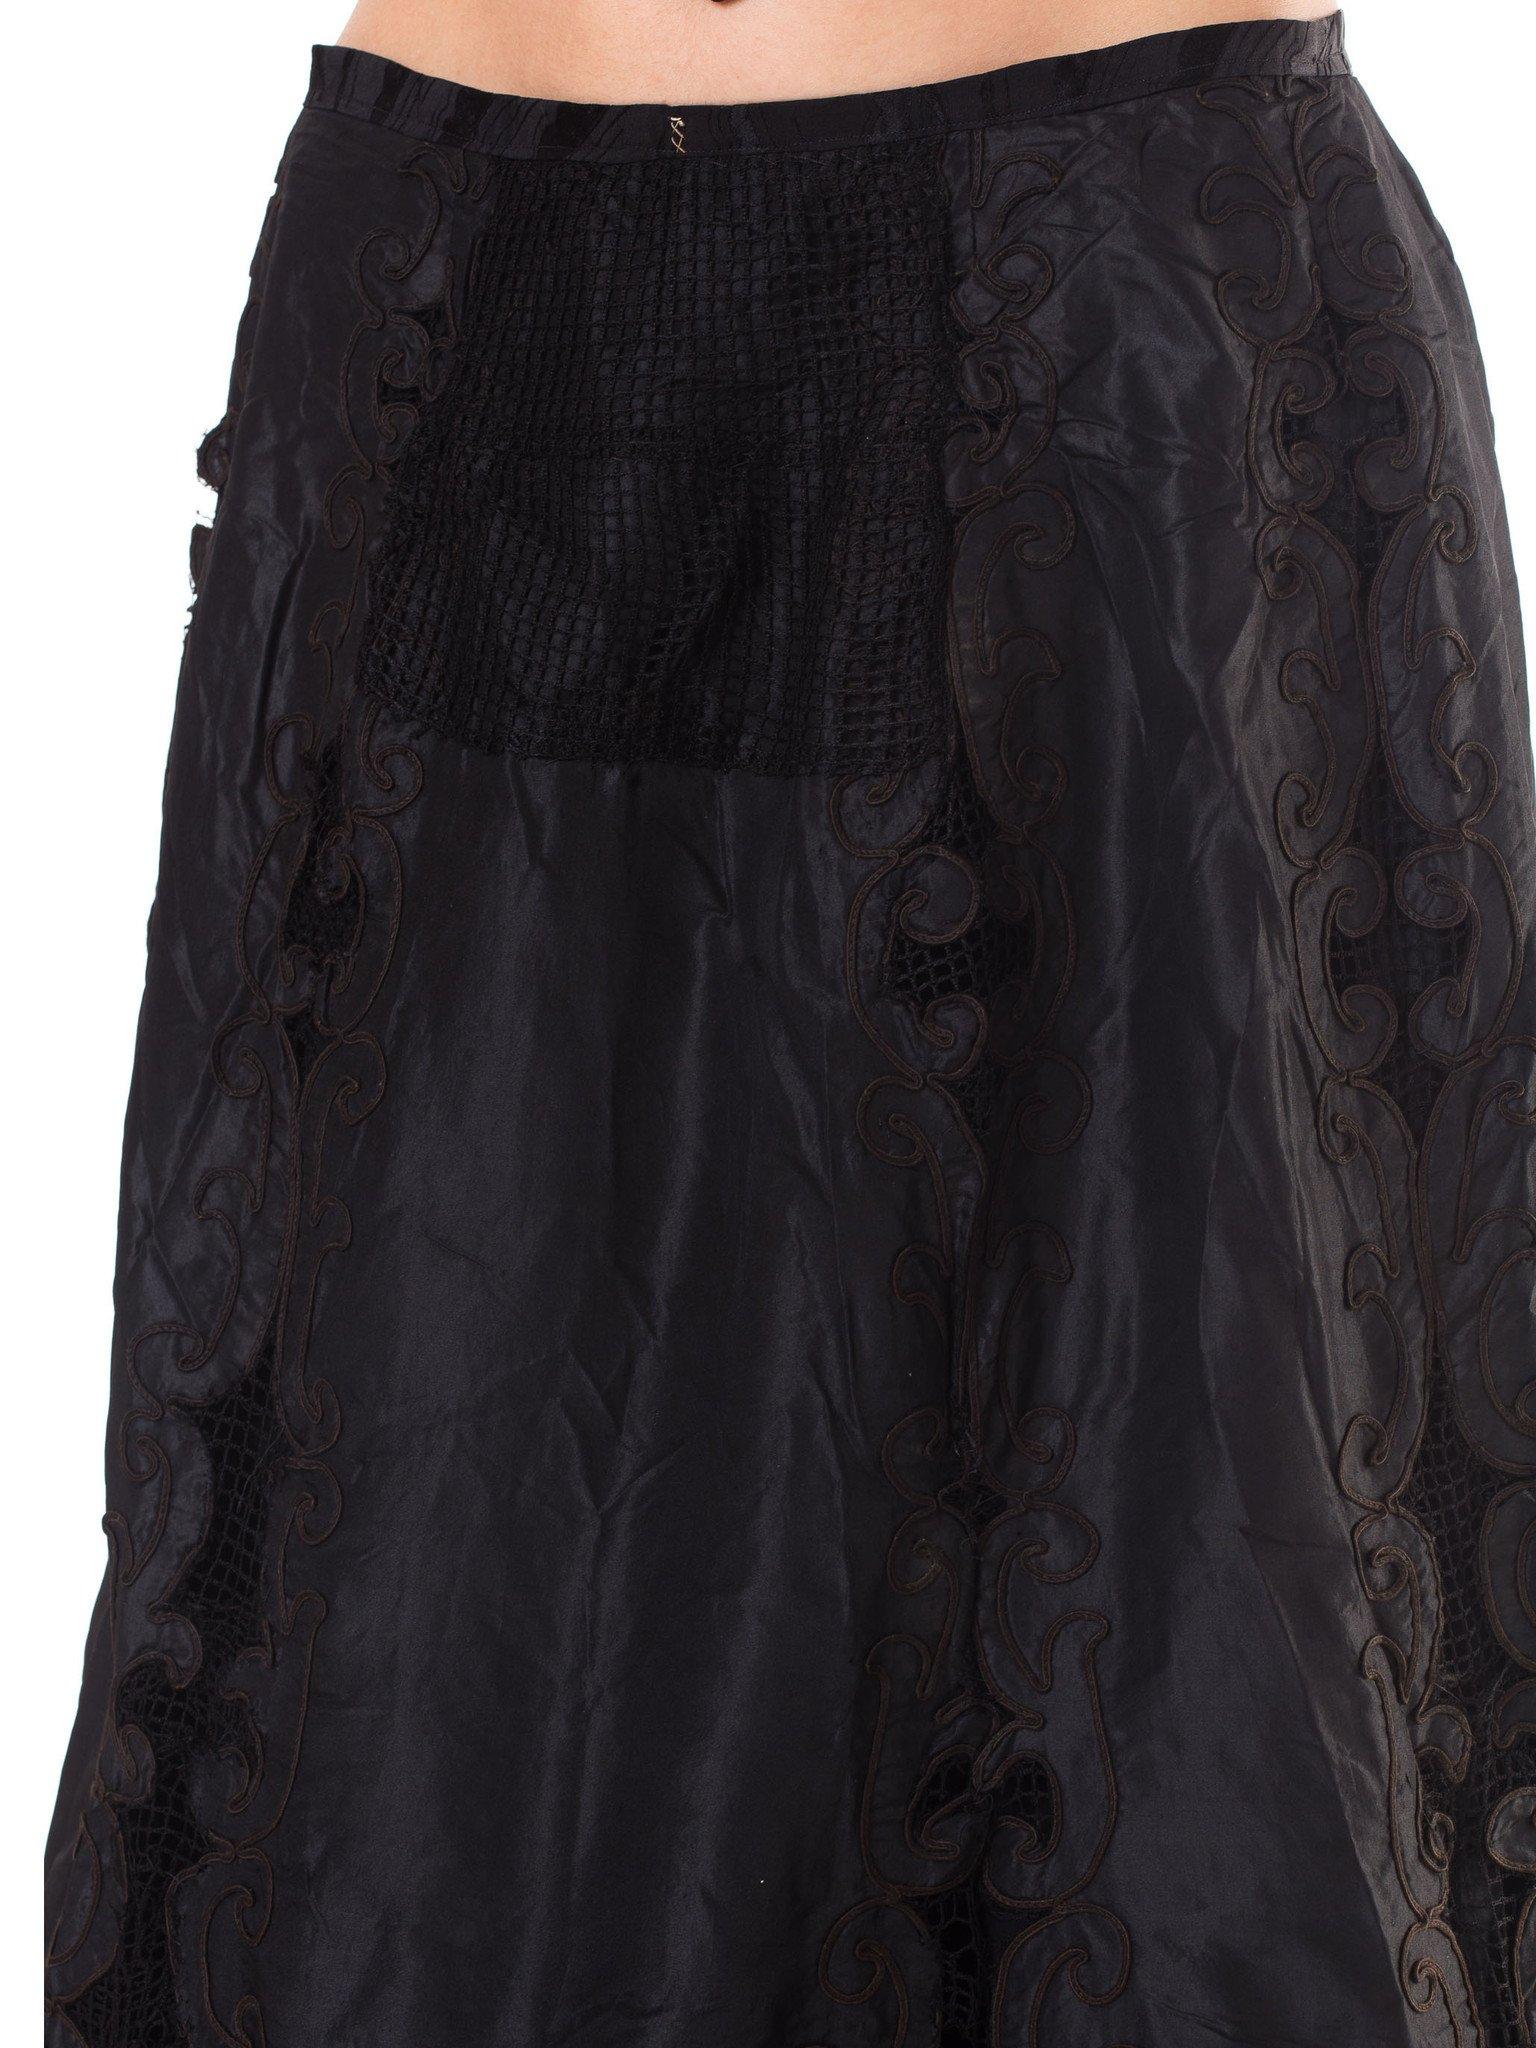 1800S Black Victorian Silk & Lace Tiered Skirt With Appliqués For Sale 1